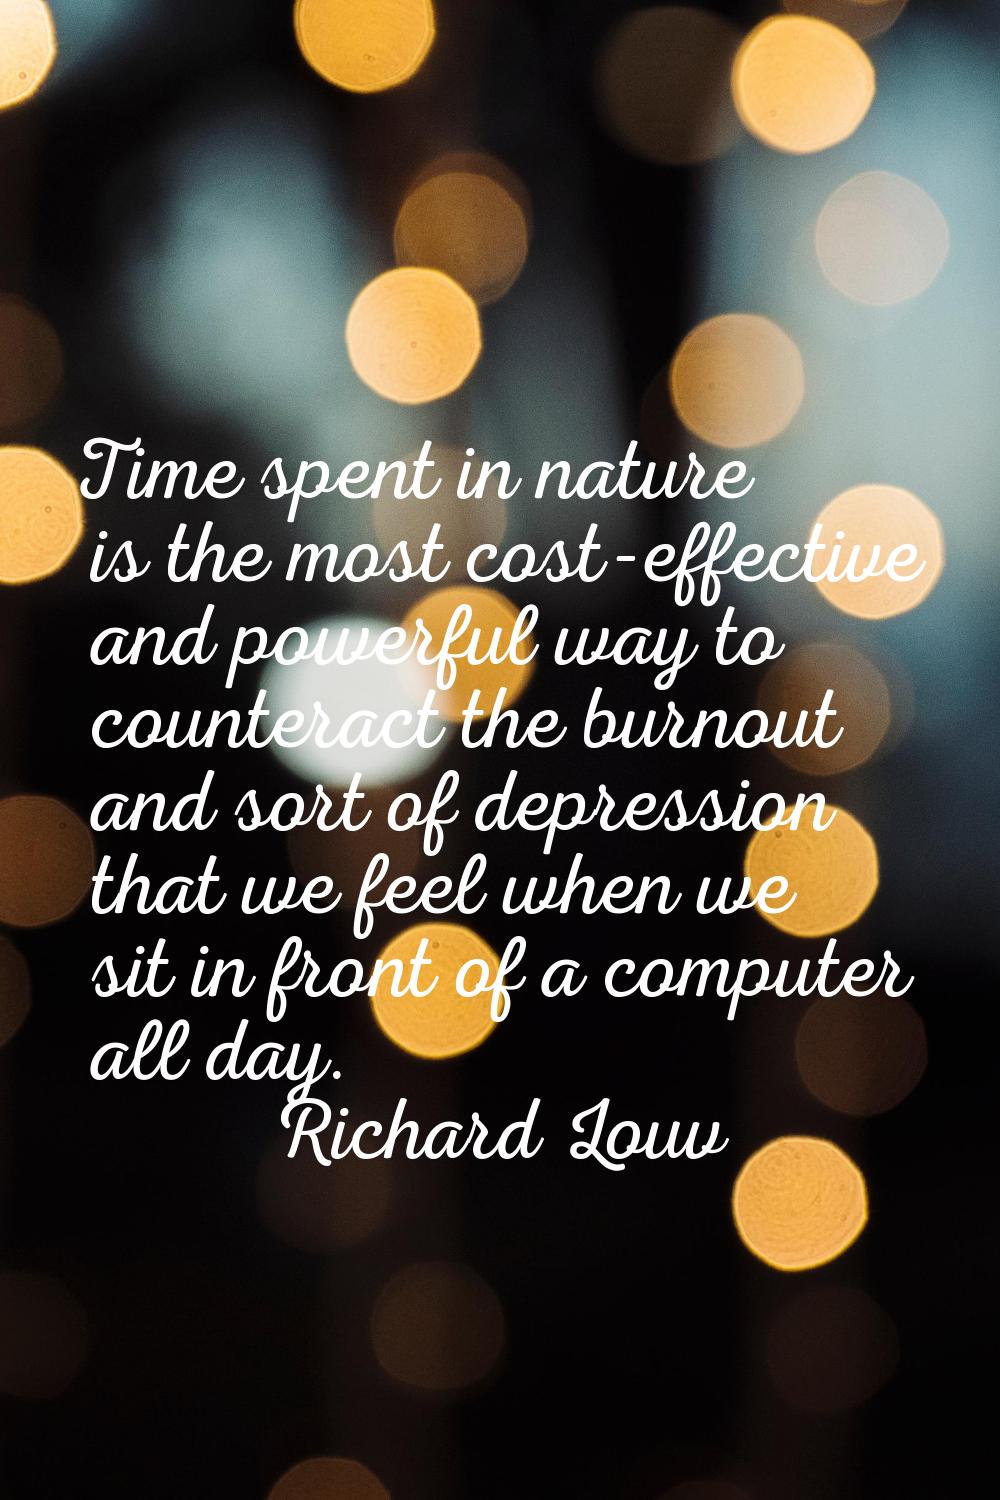 Time spent in nature is the most cost-effective and powerful way to counteract the burnout and sort